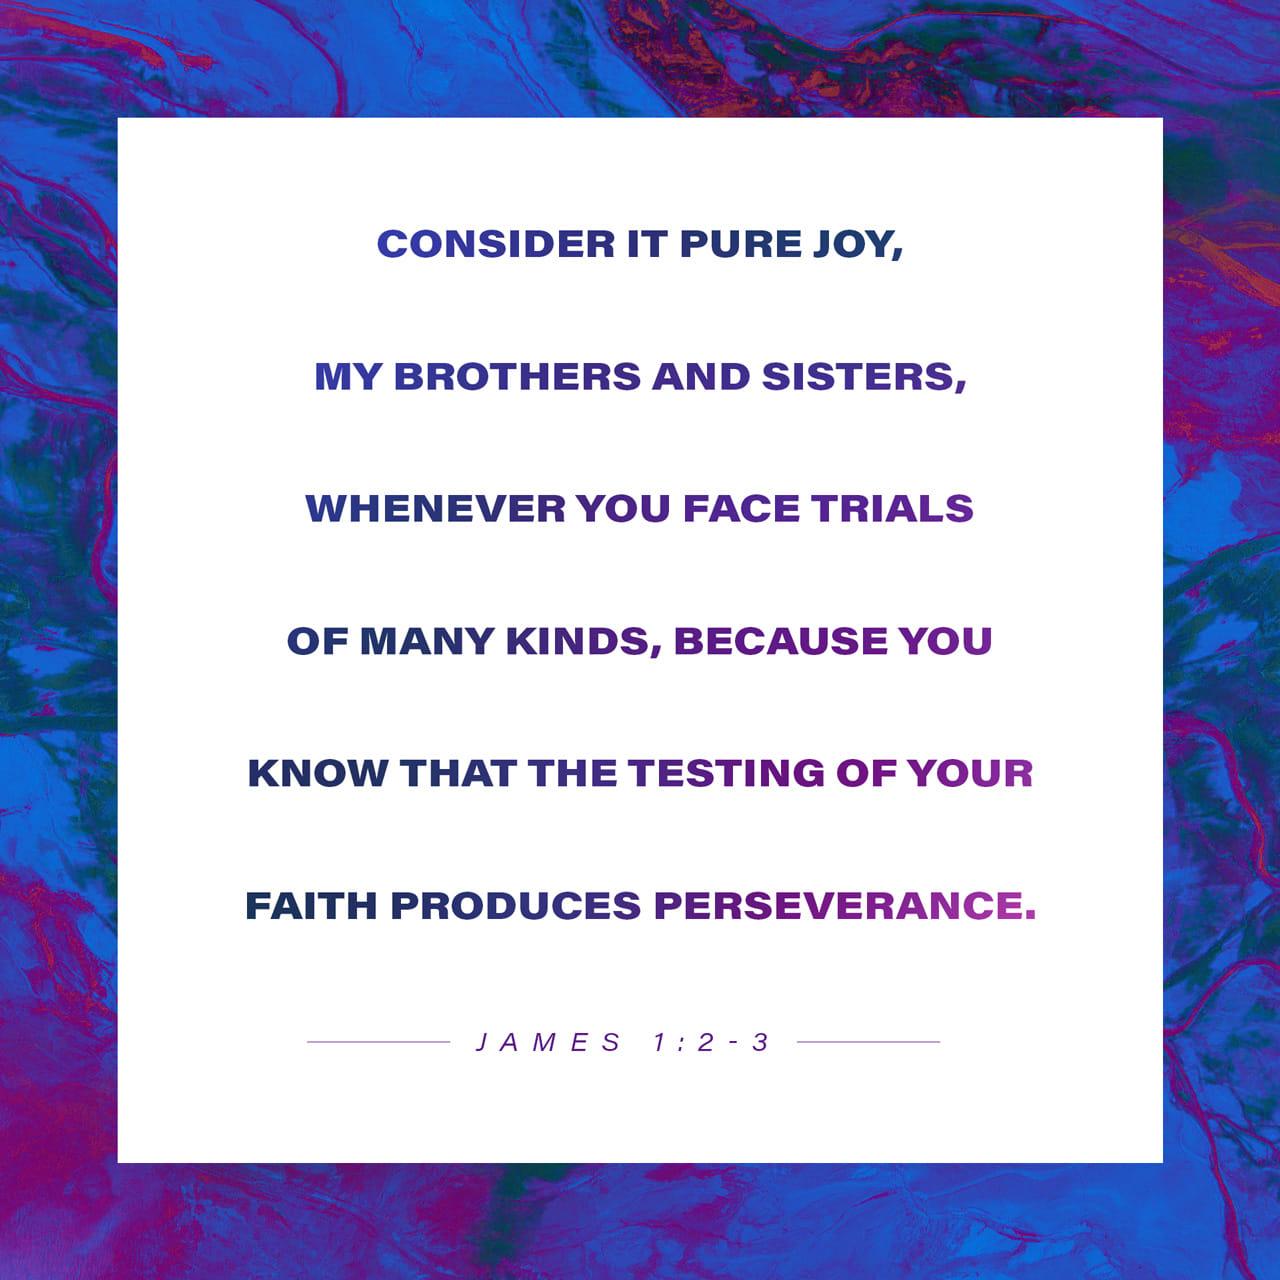 Bible Verse of the Day - day 90 - image 24420 (James 1:2)